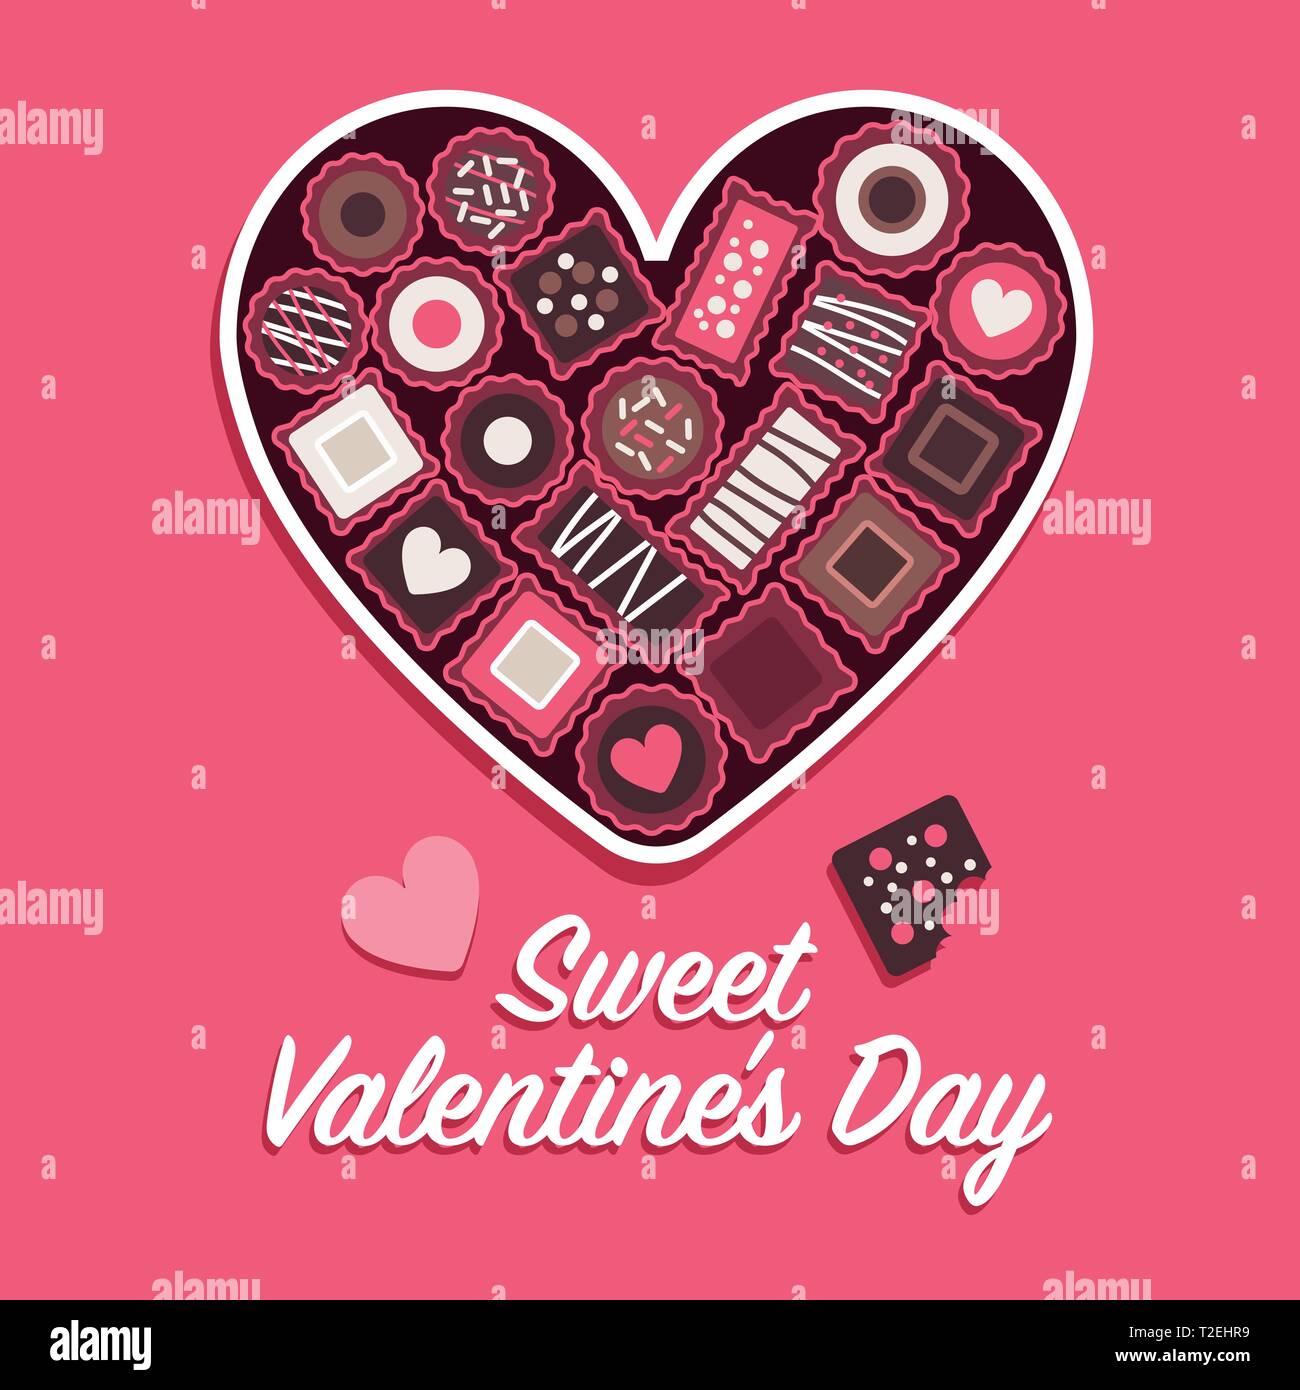 Sweet Valentine's Day card and social media post with heart shaped chocolates box Stock Vector